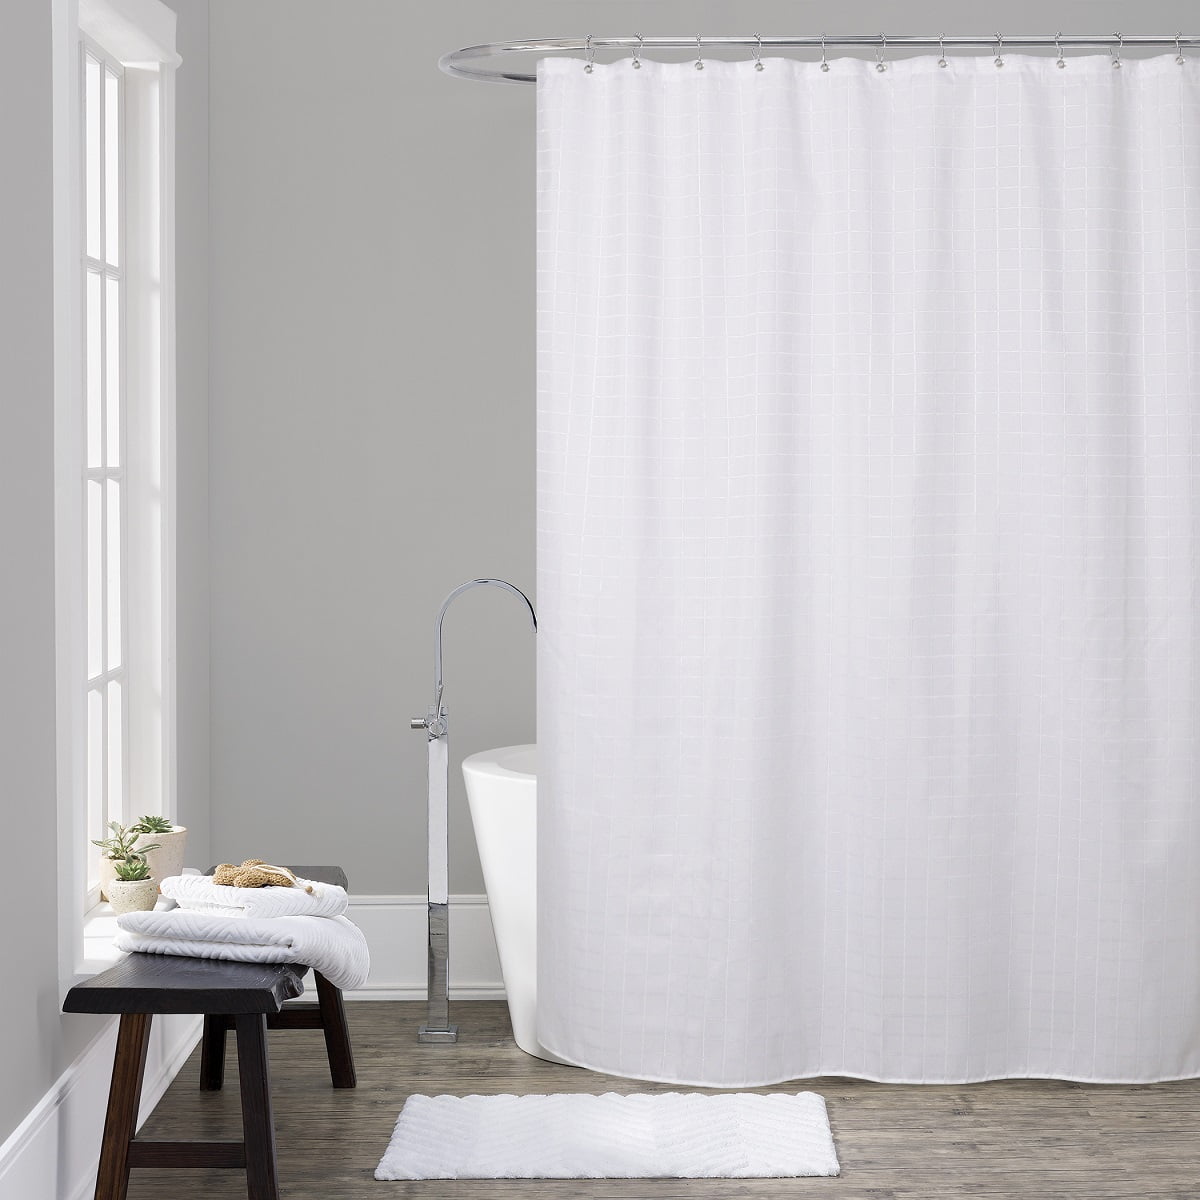 Waterproof Total Pr LORDTEX Ombre Textured Fabric Shower Curtains for Bathroom 